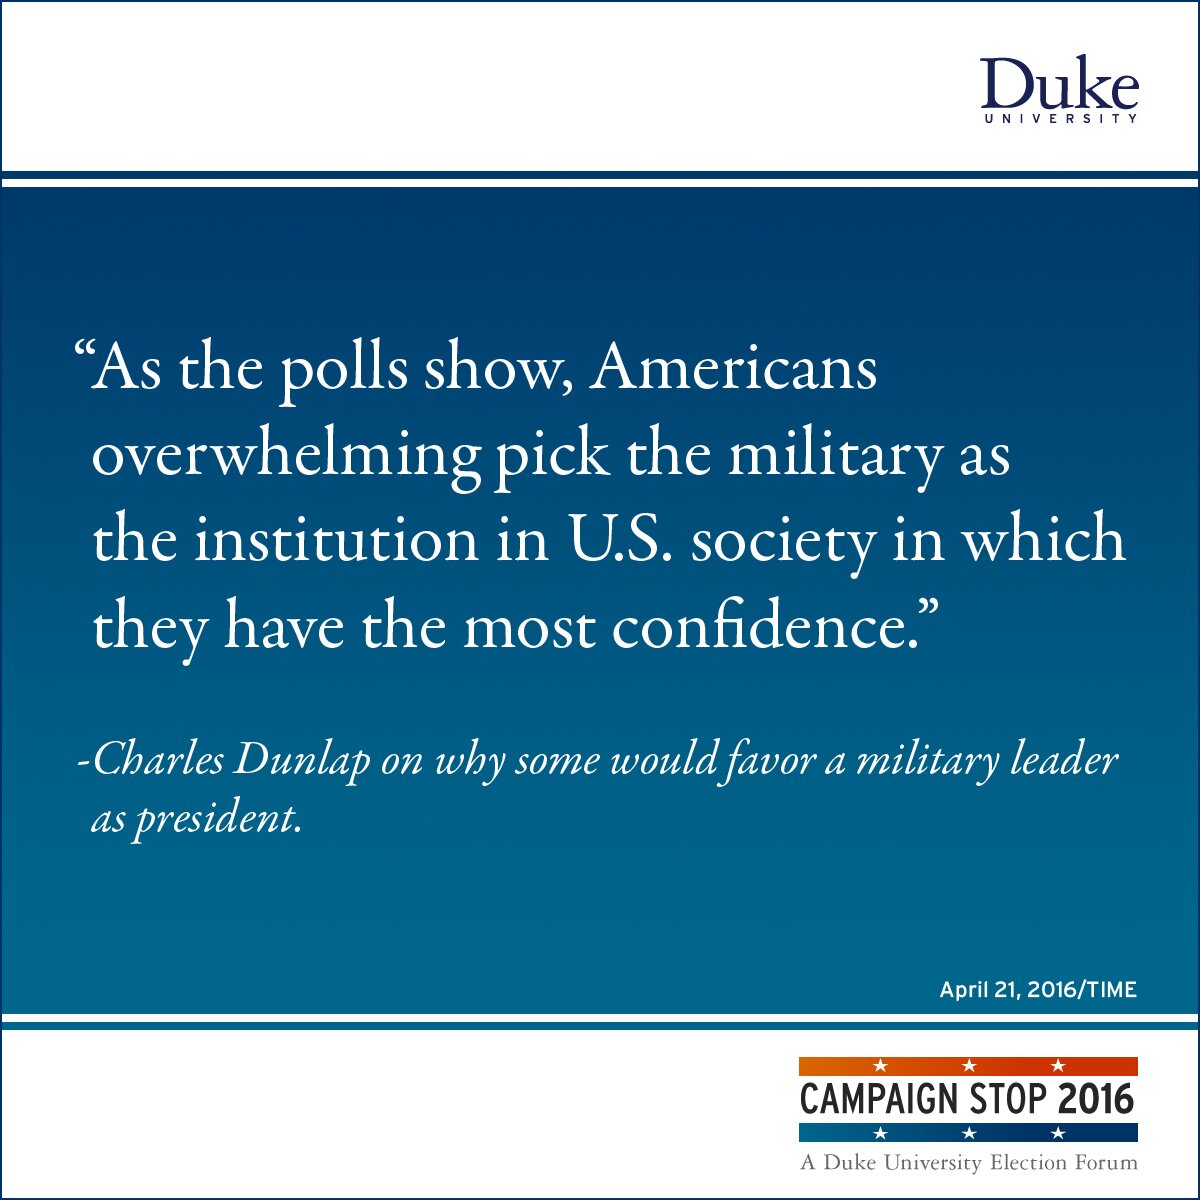 “As the polls show, Americans overwhelming pick the military as the institution in U.S. society in which they have the most confidence.” -Charles Dunlap on why some would favor a military leader as president.